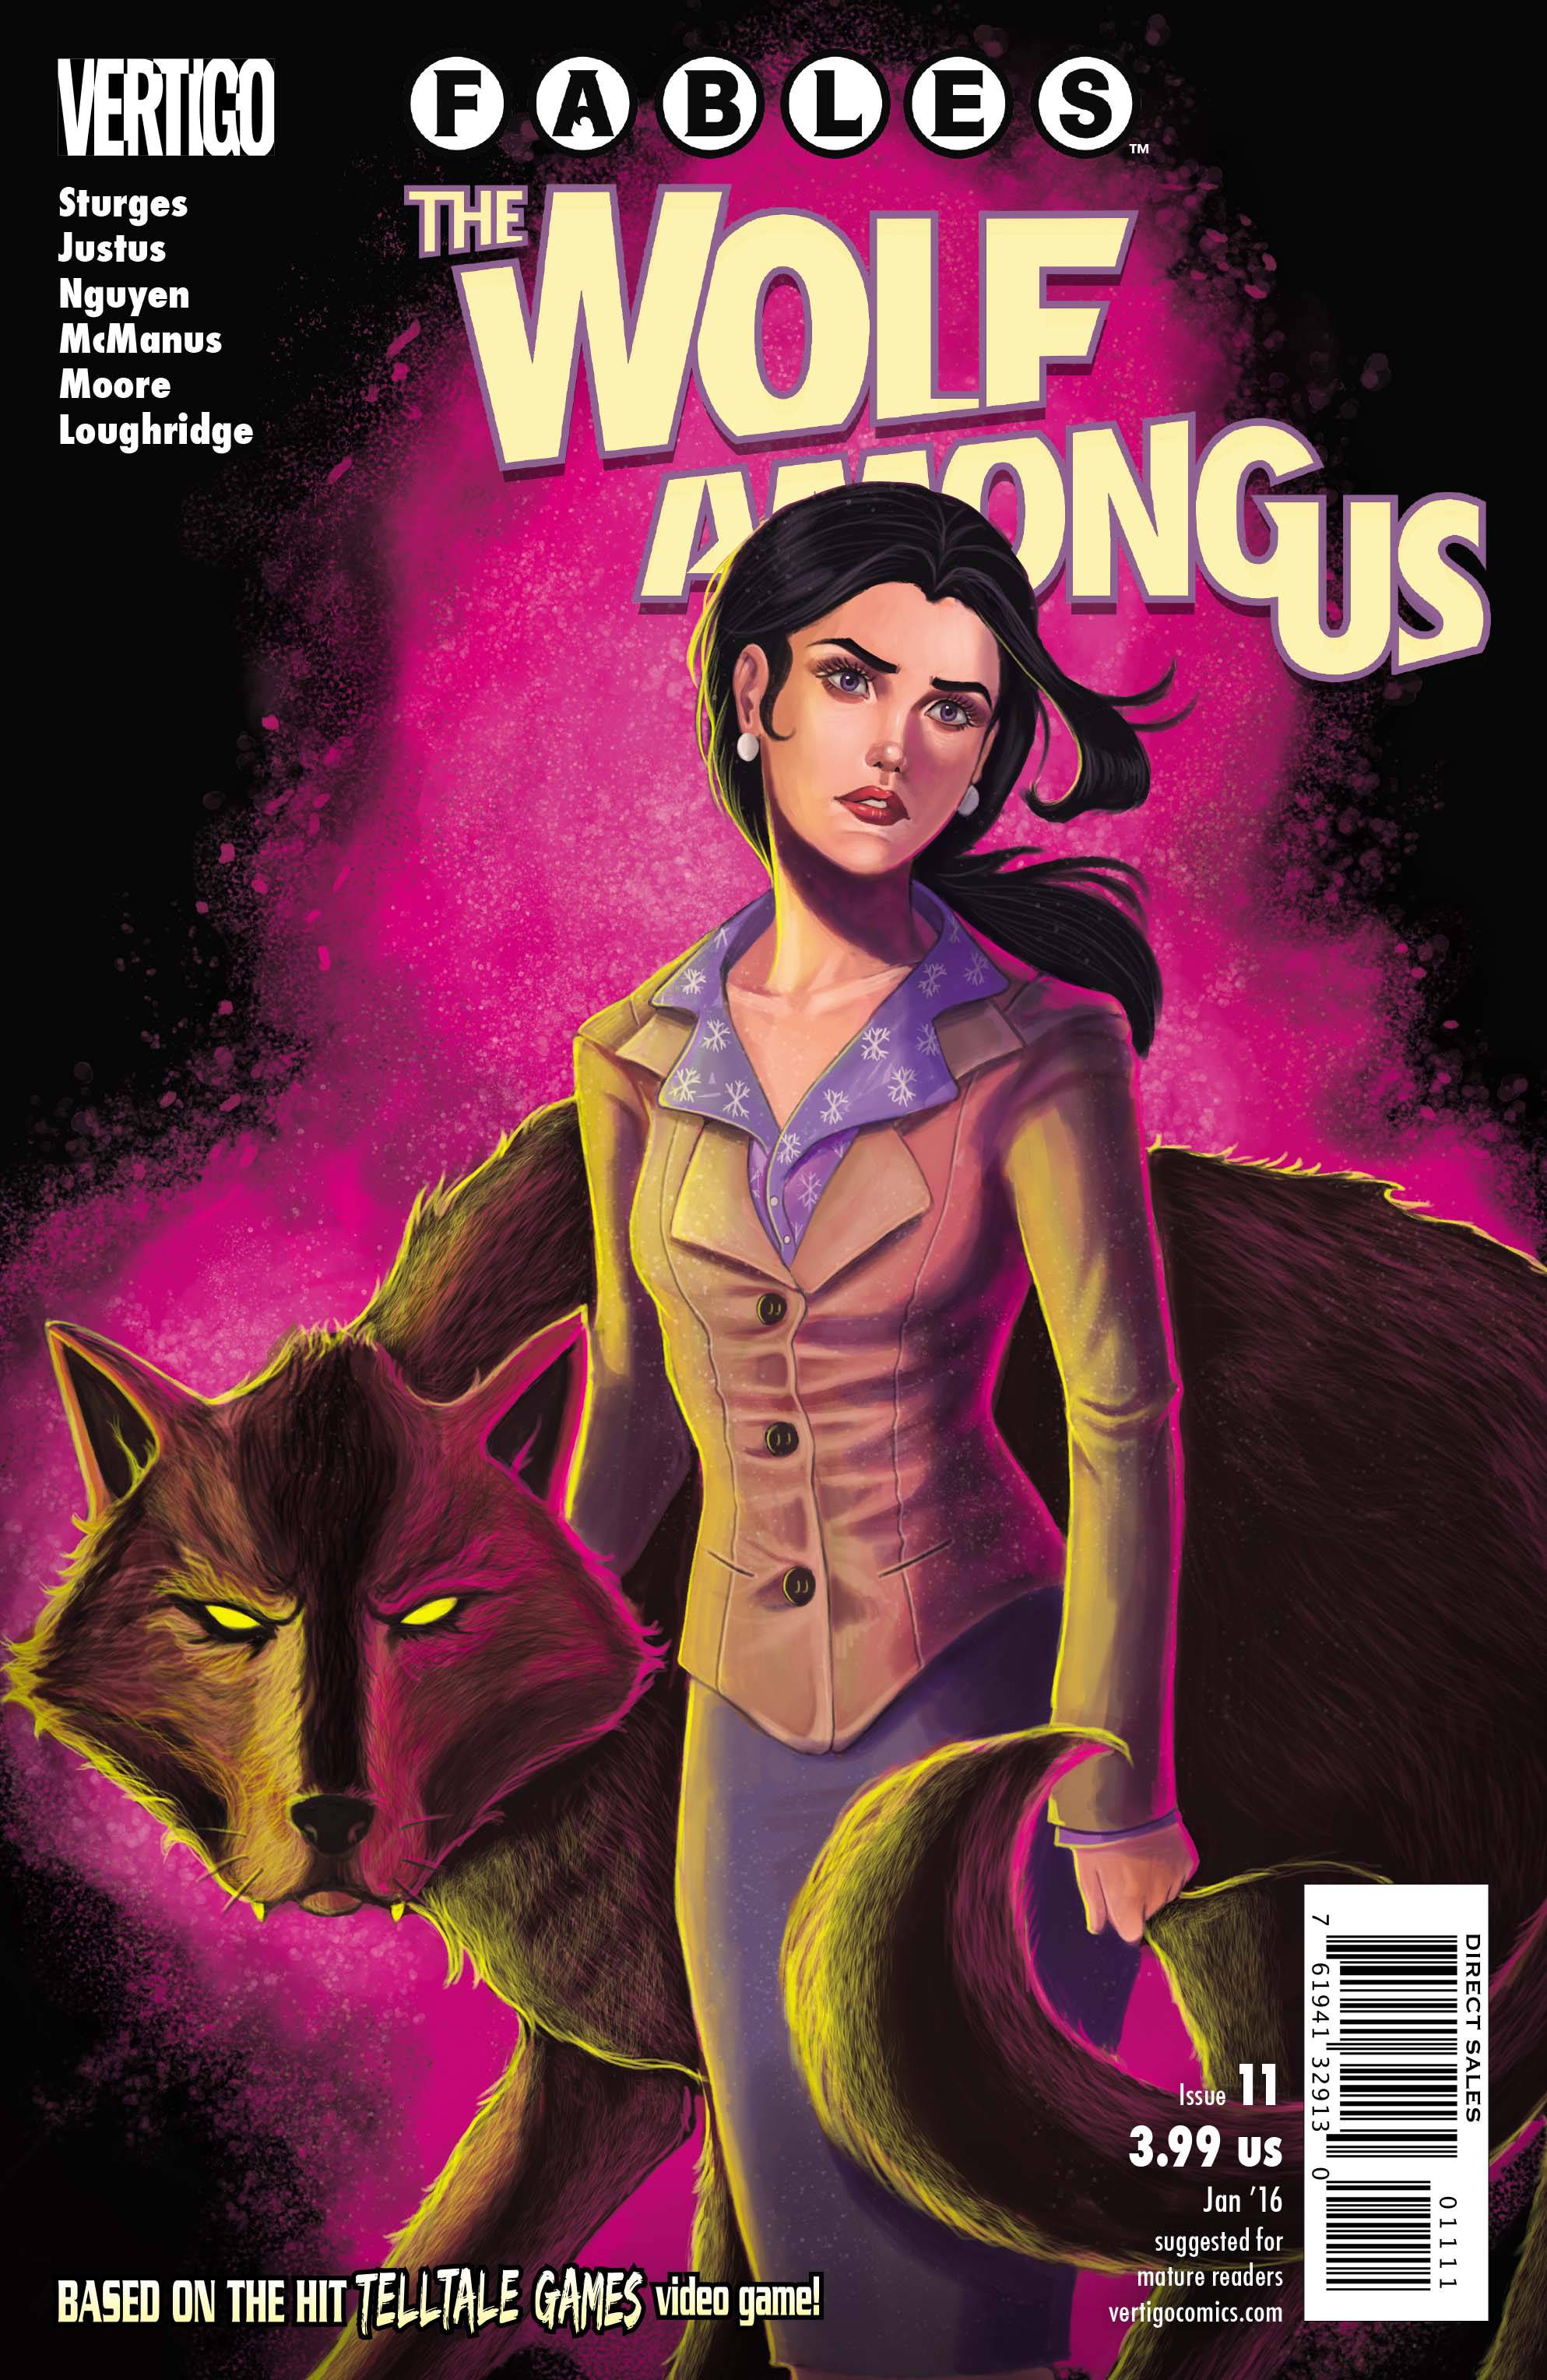 the wolf among us game cover